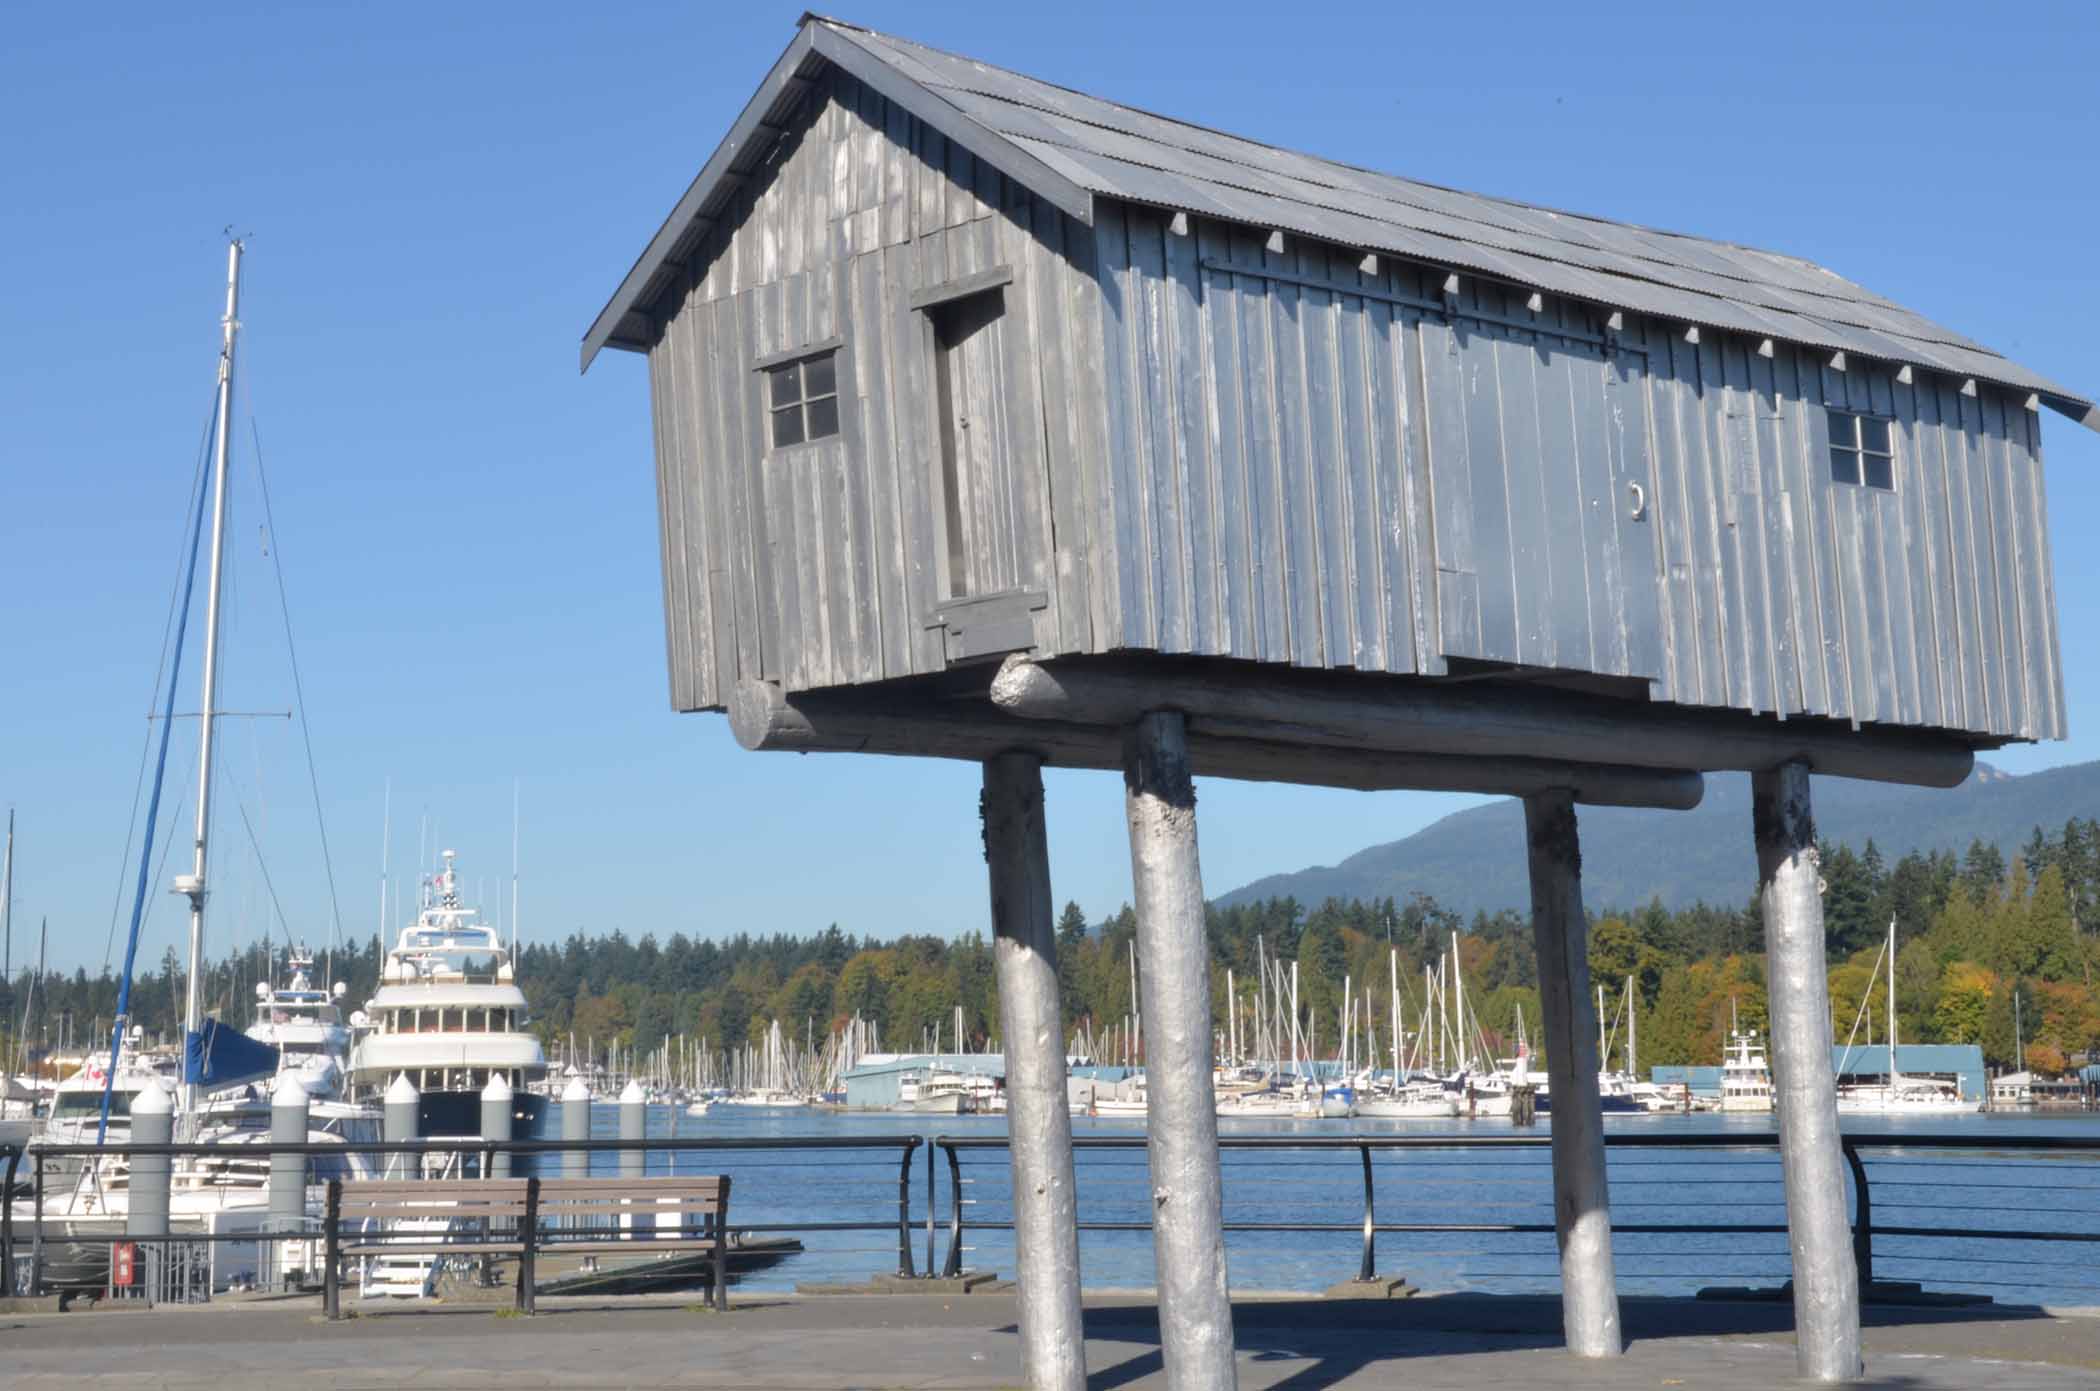 House on Stilts on Vancouver Waterfront